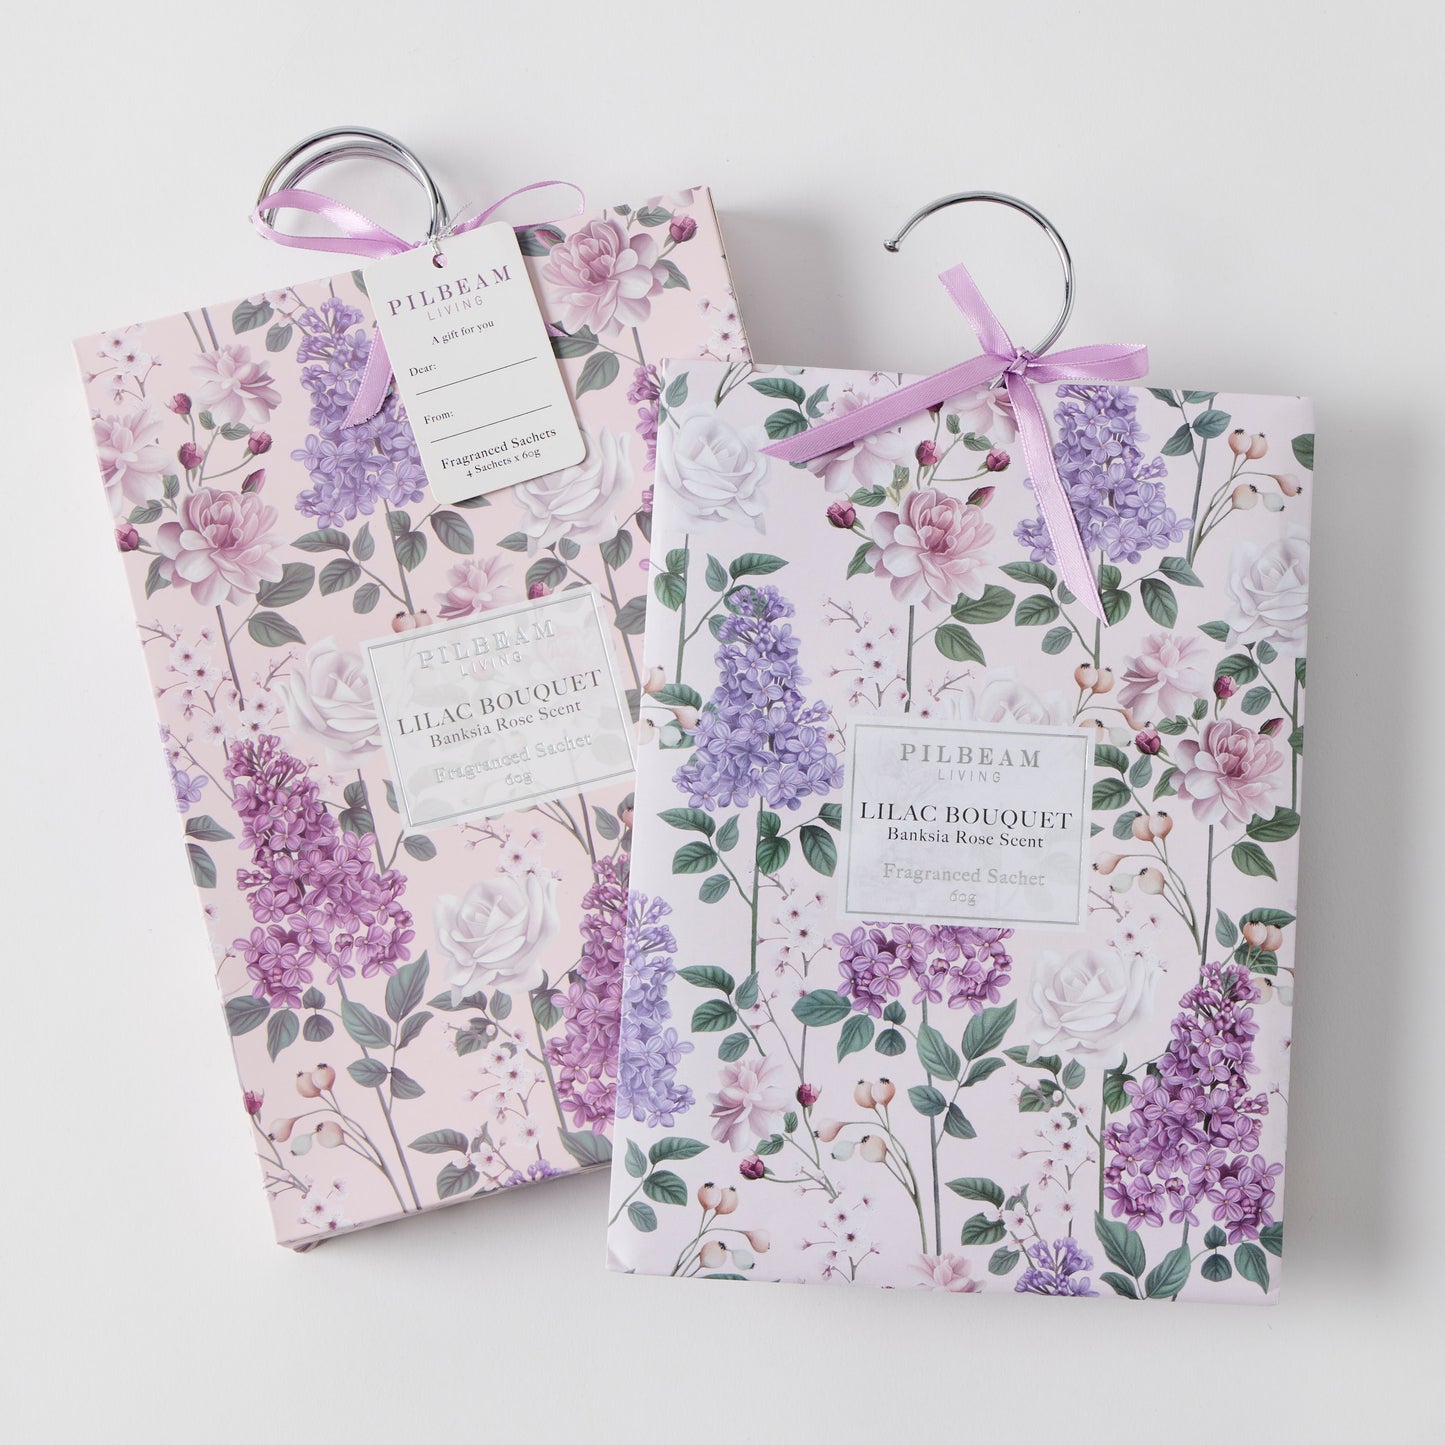 Lilac Bouquet Scented Hanging Sachets